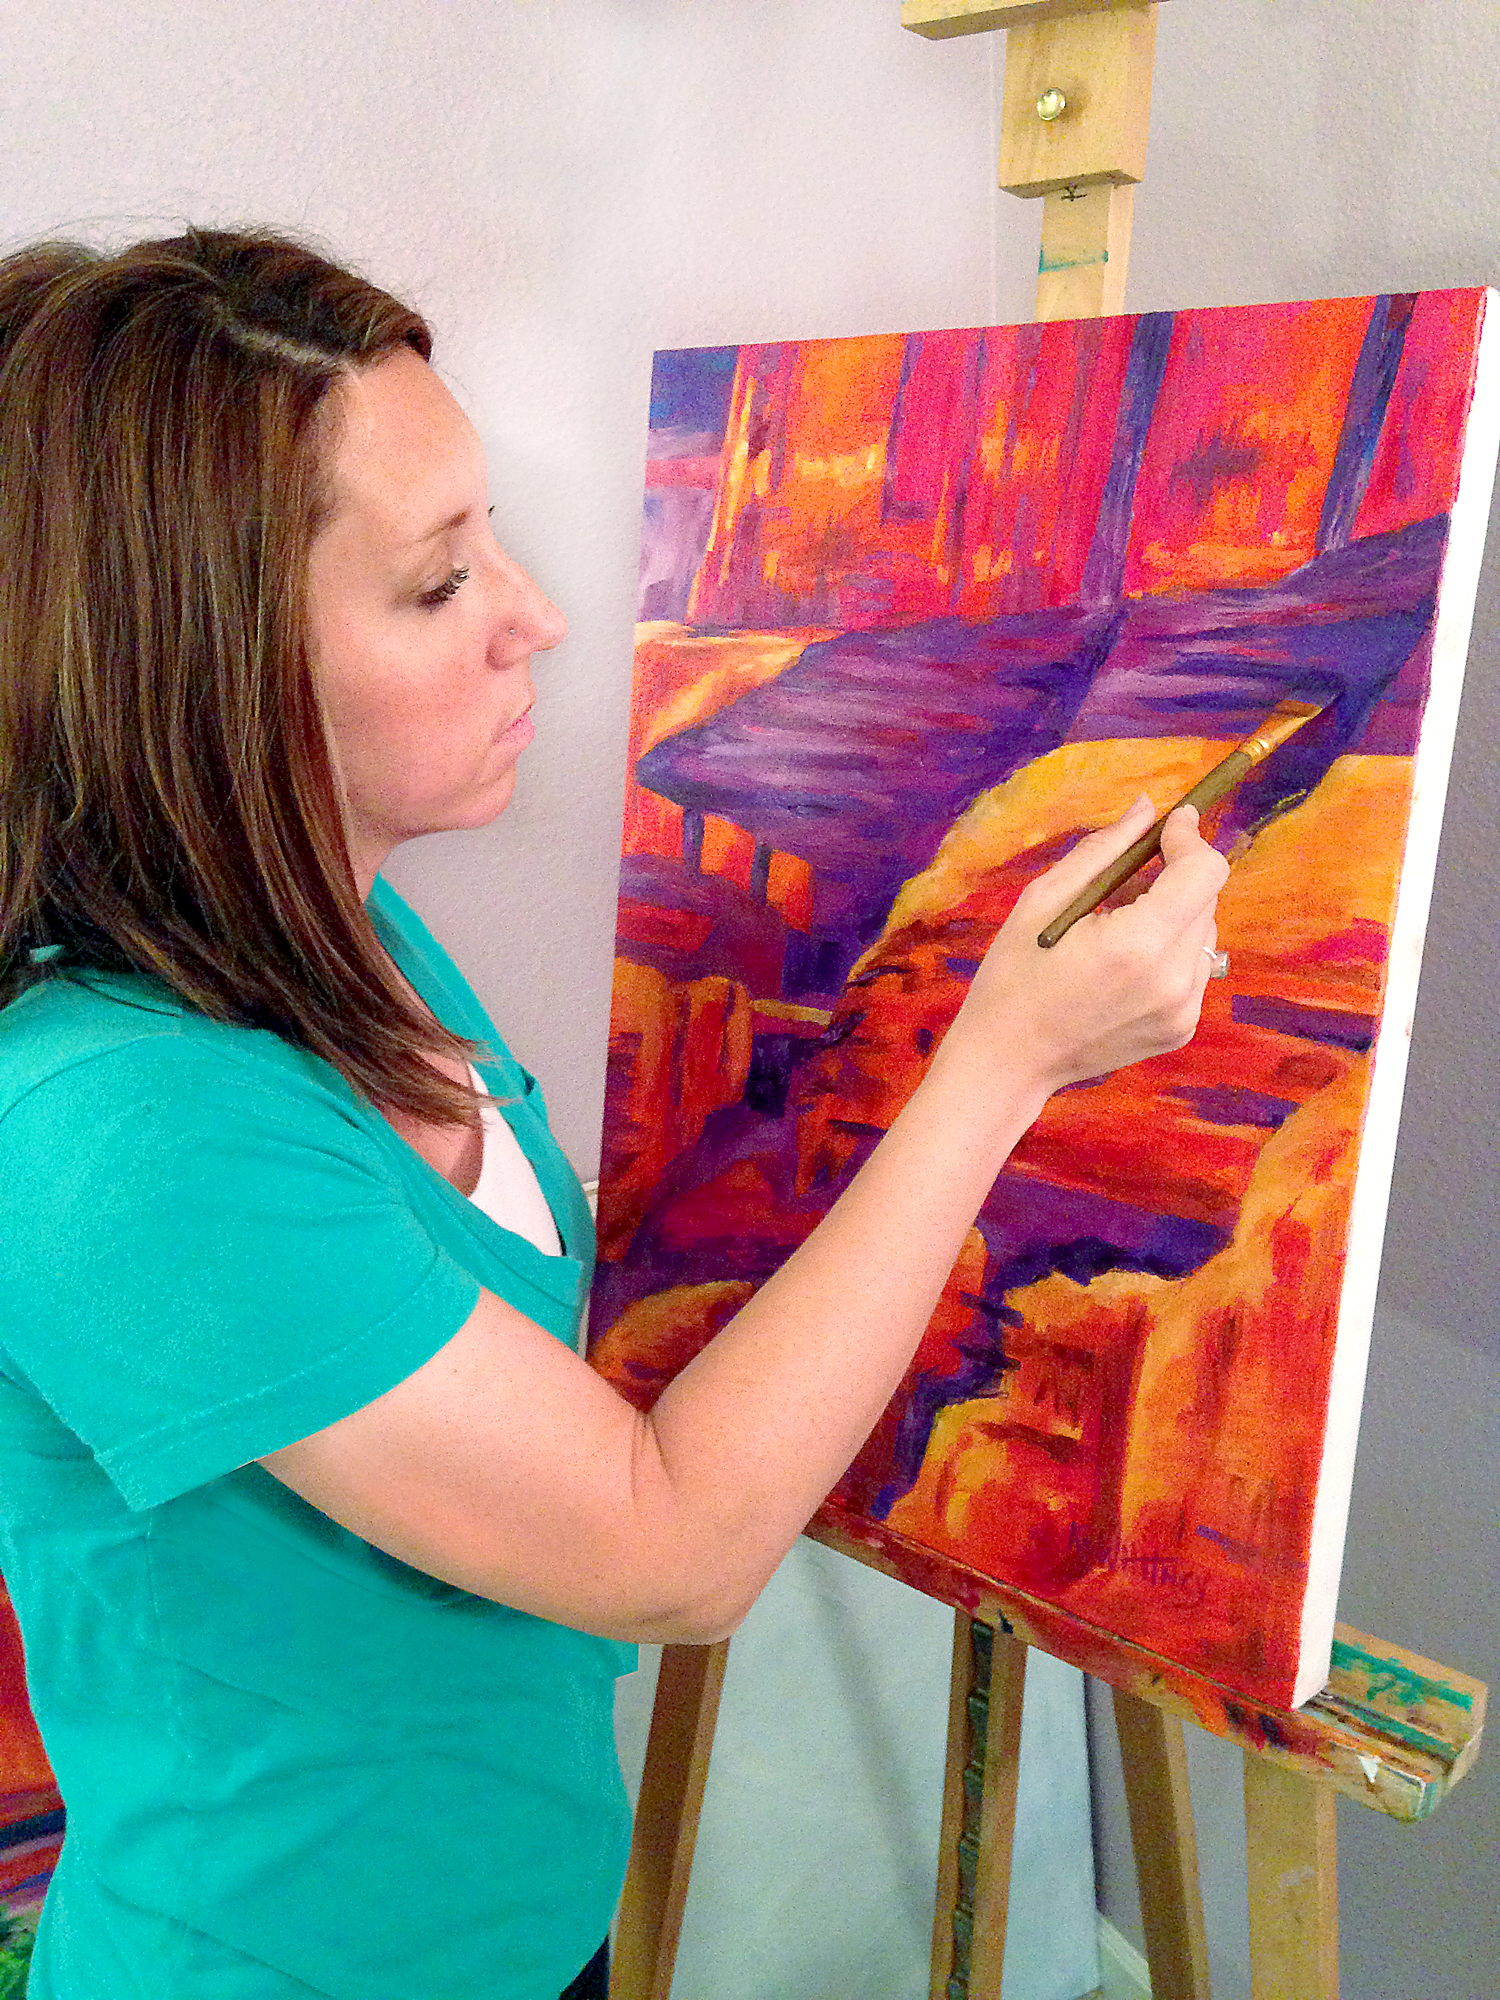 Westfield artist Kristin Whitney painted her “Chromatic Canyon” based on photos she took of her visits to the Grand Canyon. (Submitted photo)